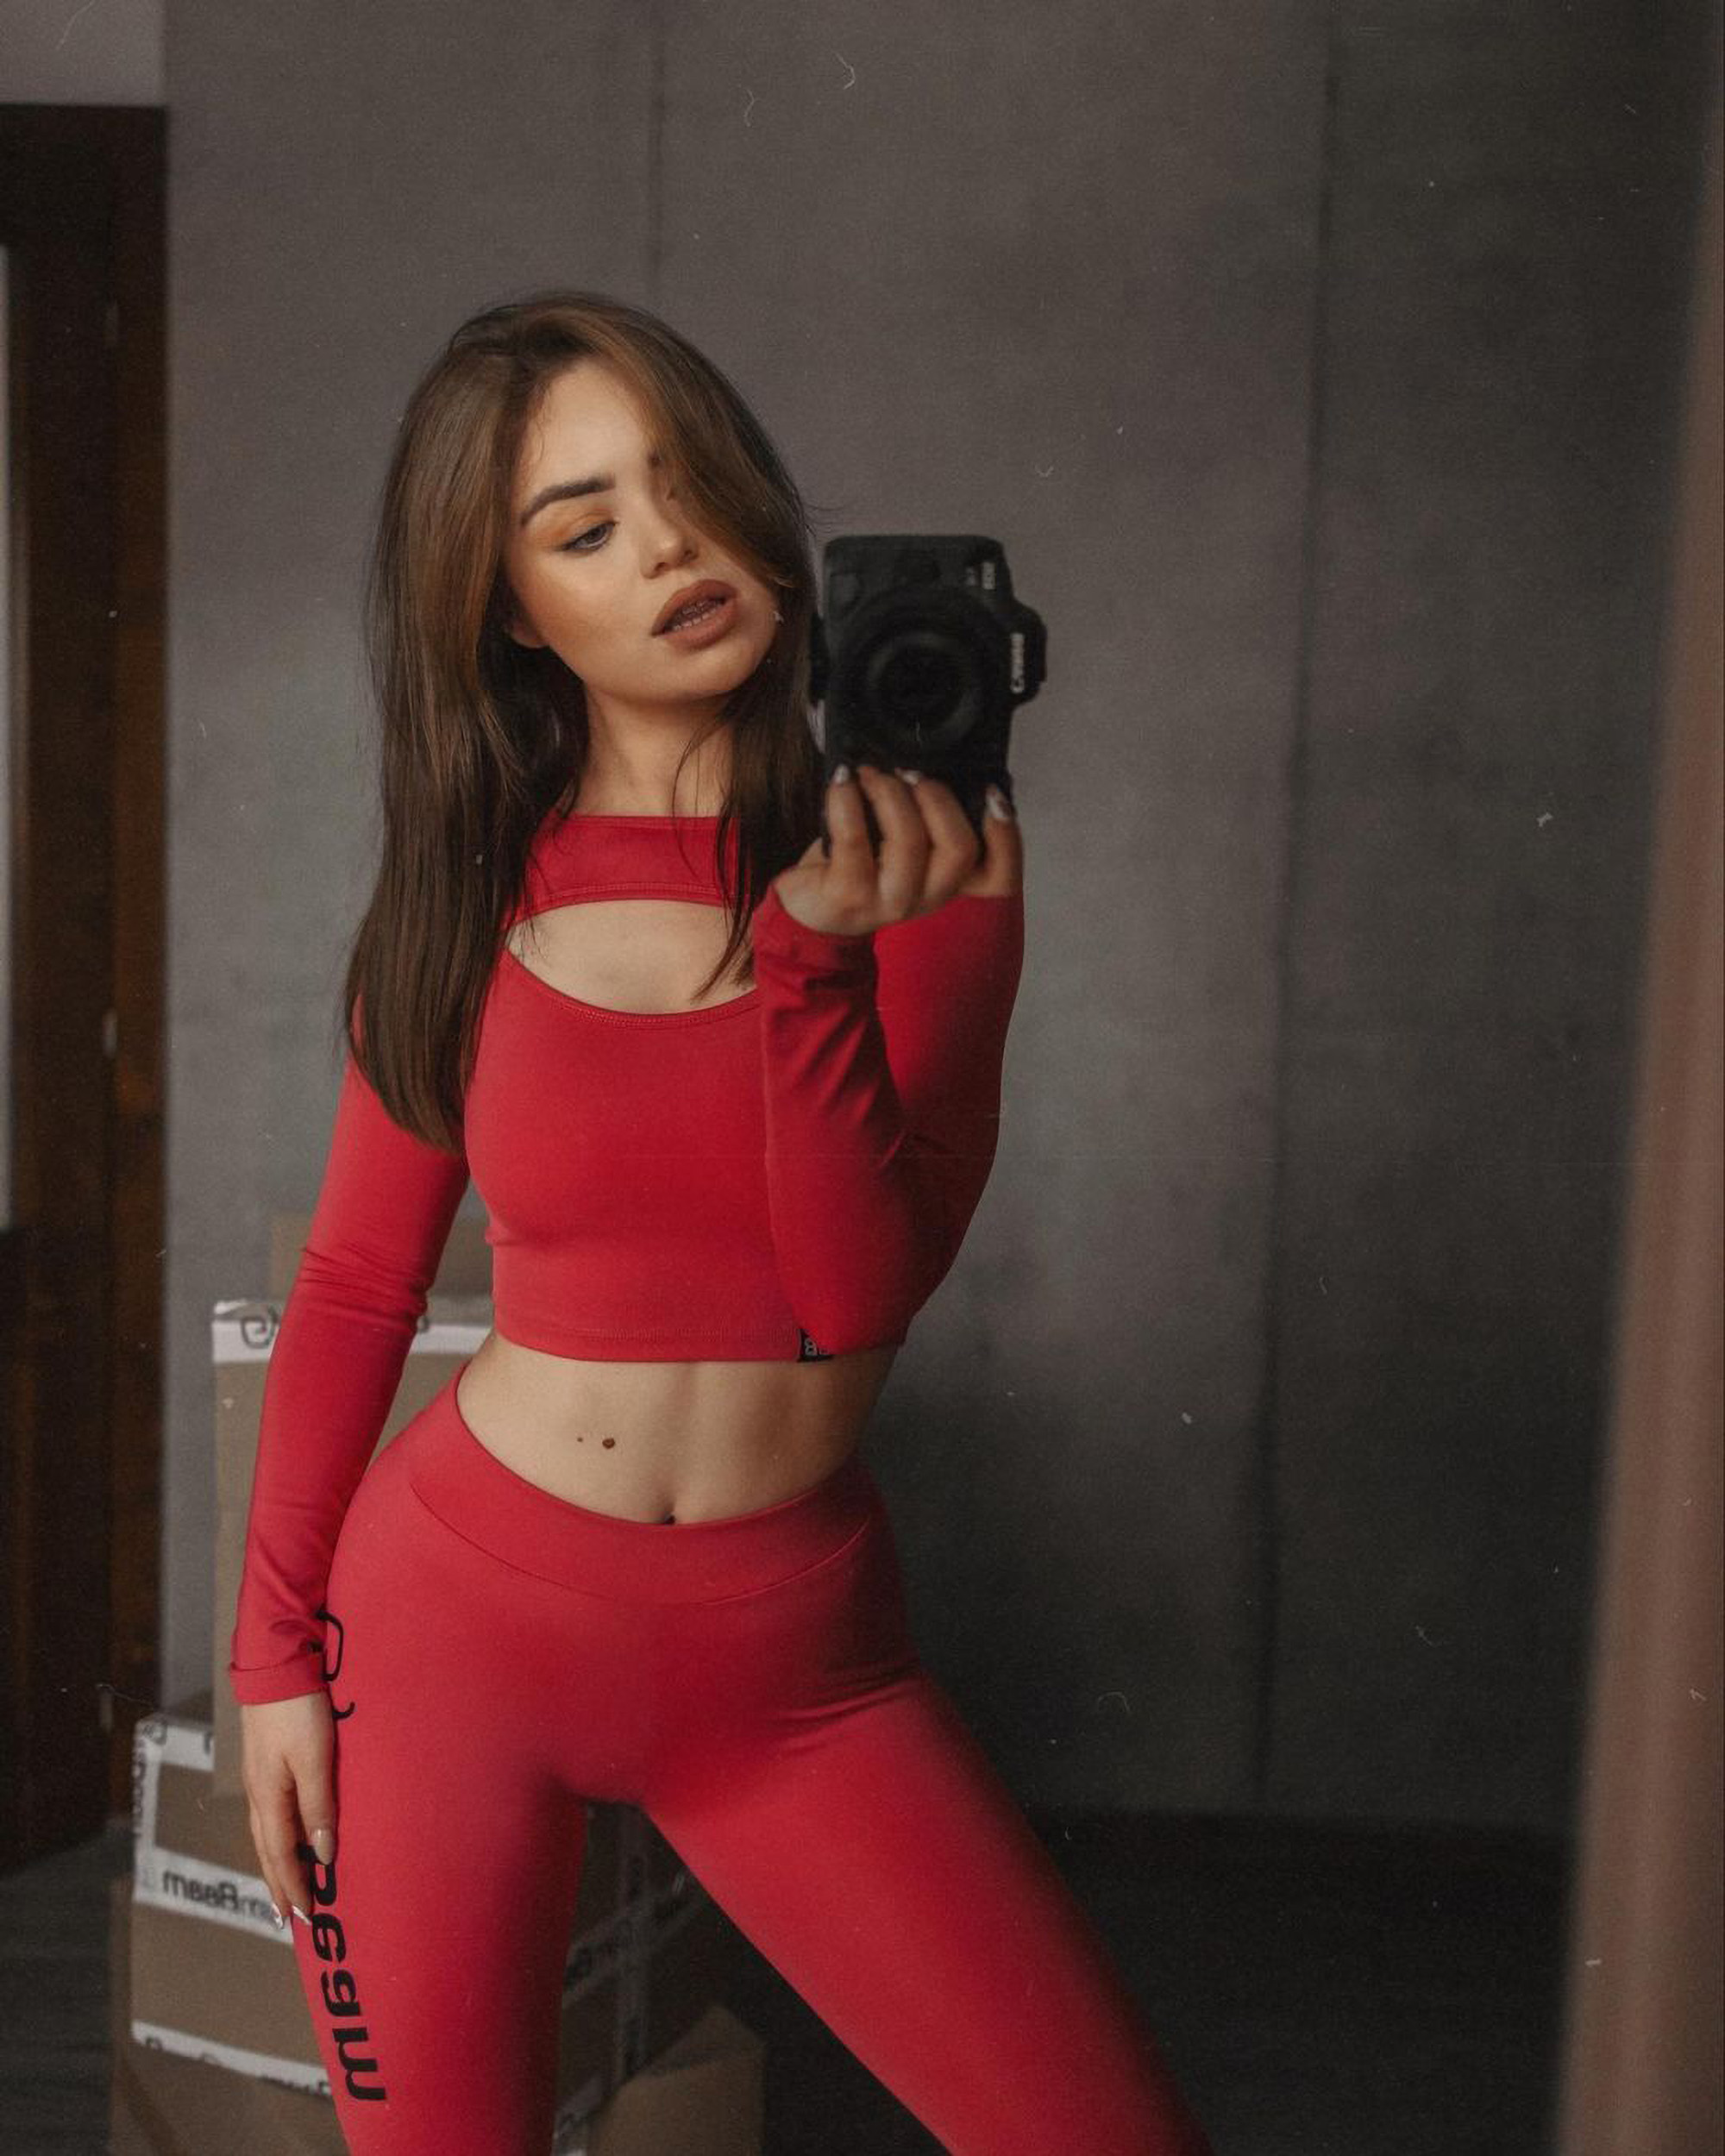 Read more about the article Romanian Instagram Influencer Outstrips Kylie Jenner With 100M Views In Just 3 Weeks